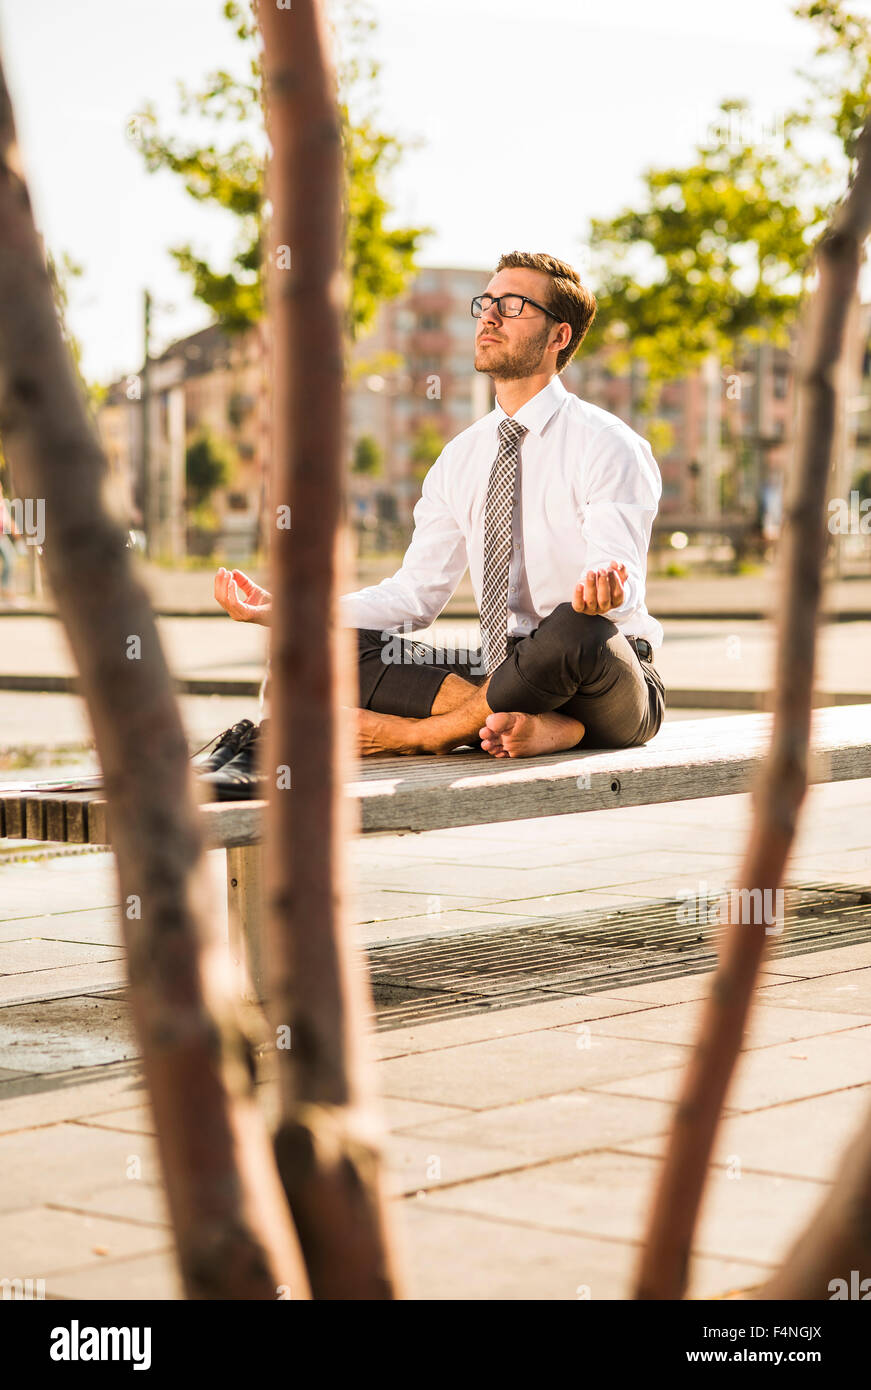 Young businessman meditating on bench Stock Photo